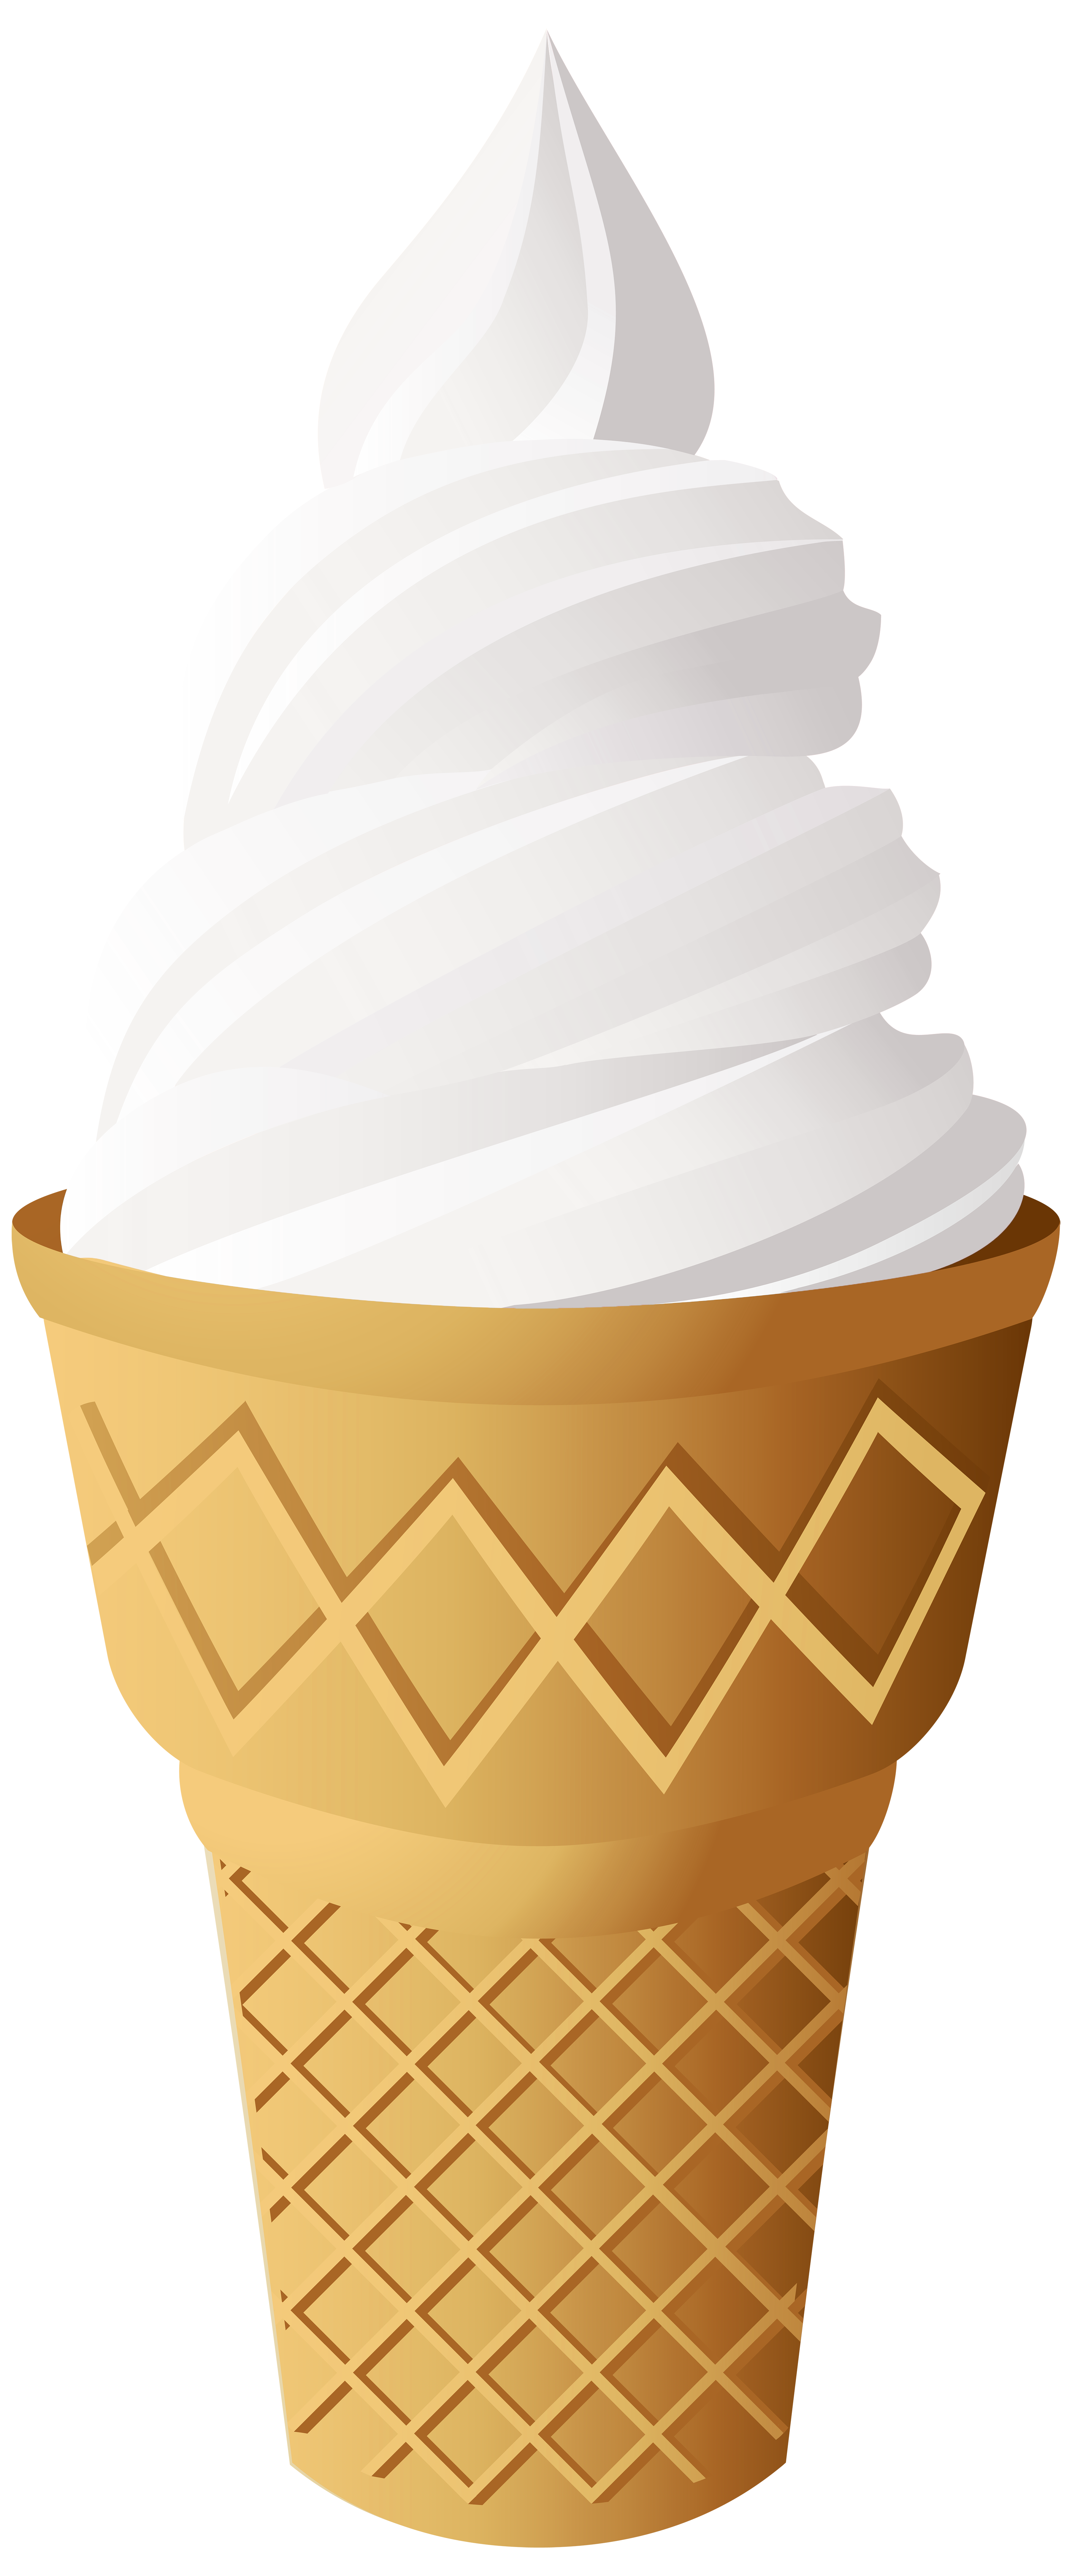 ice cream clipart png - photo #37